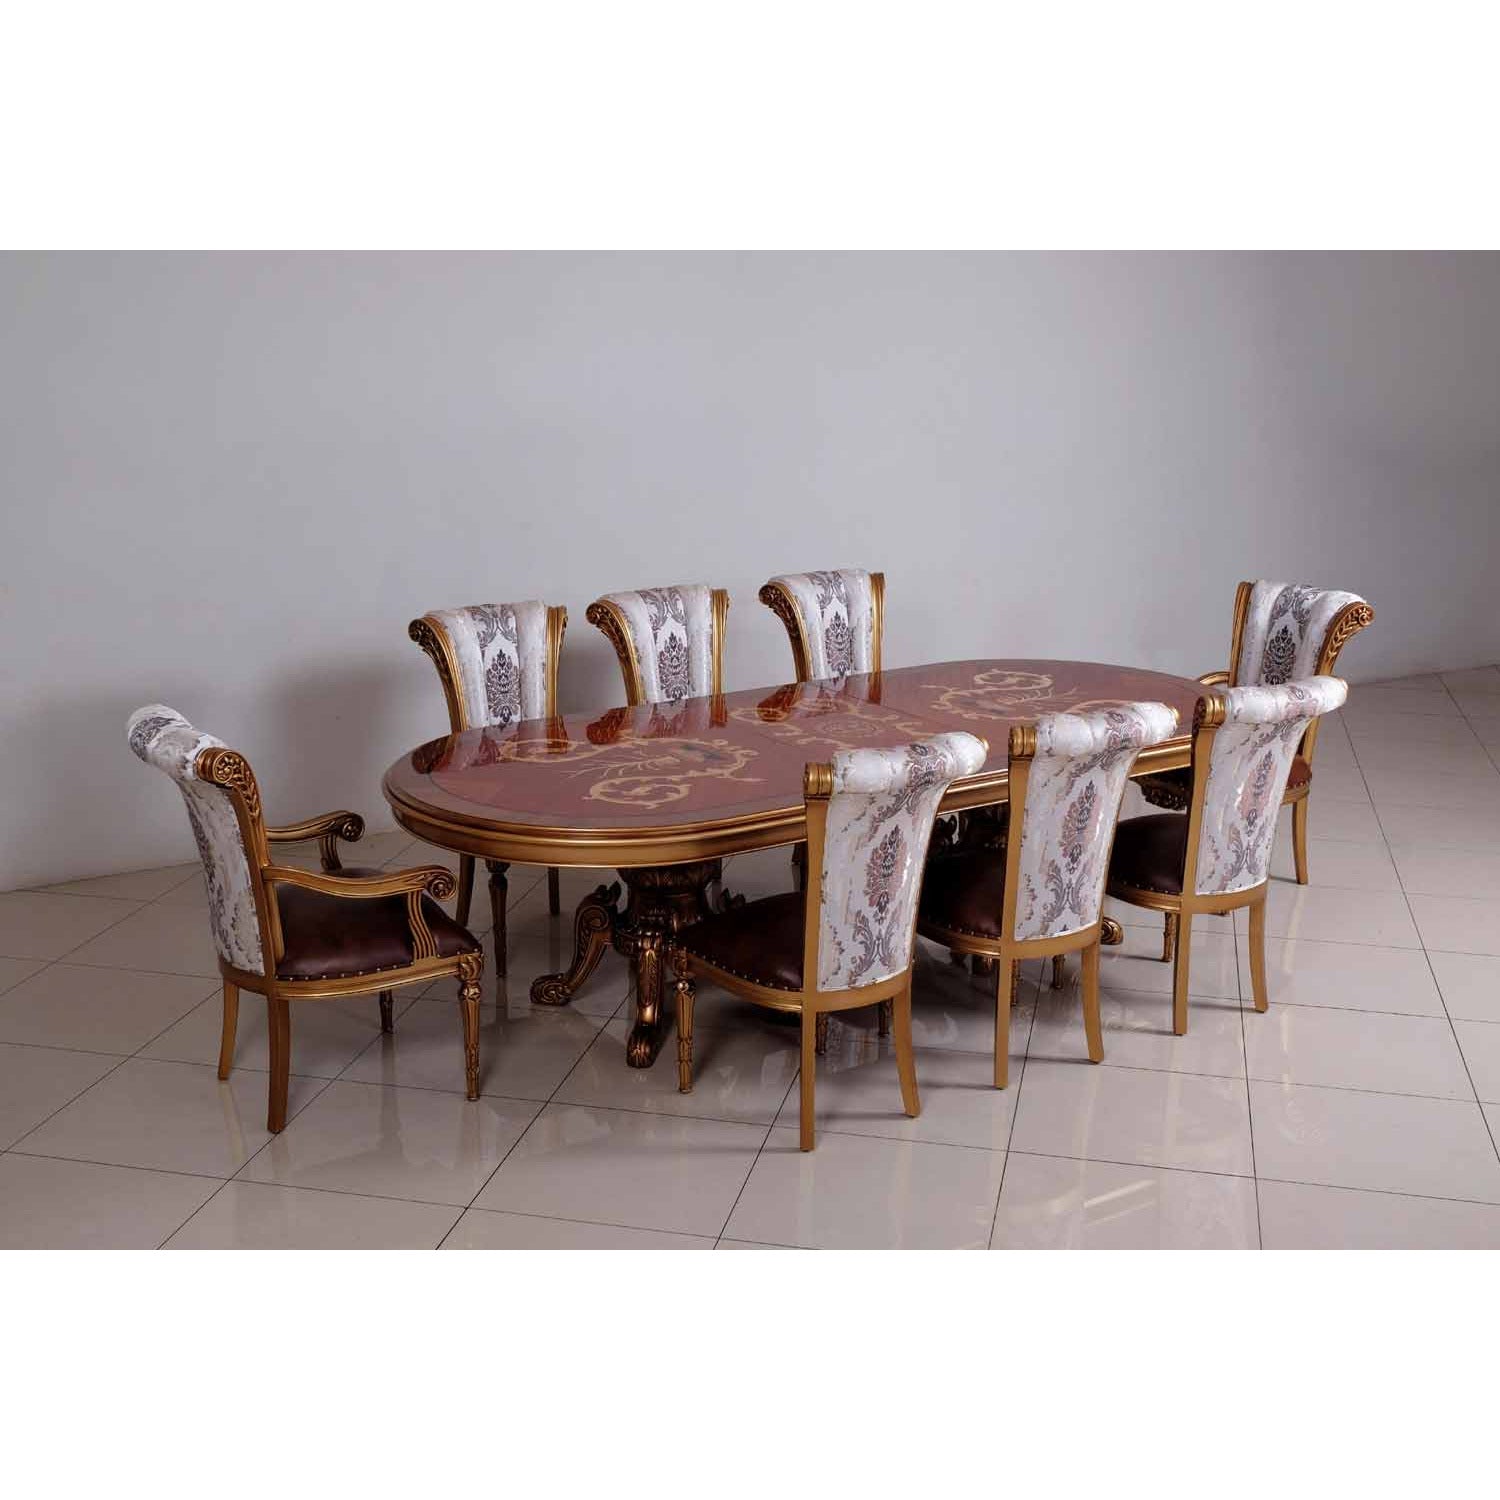 European Furniture - Maggiolini 5 Piece Dining Room Set in Brown and Gold Leaf - 61952-5SET - New Star Living